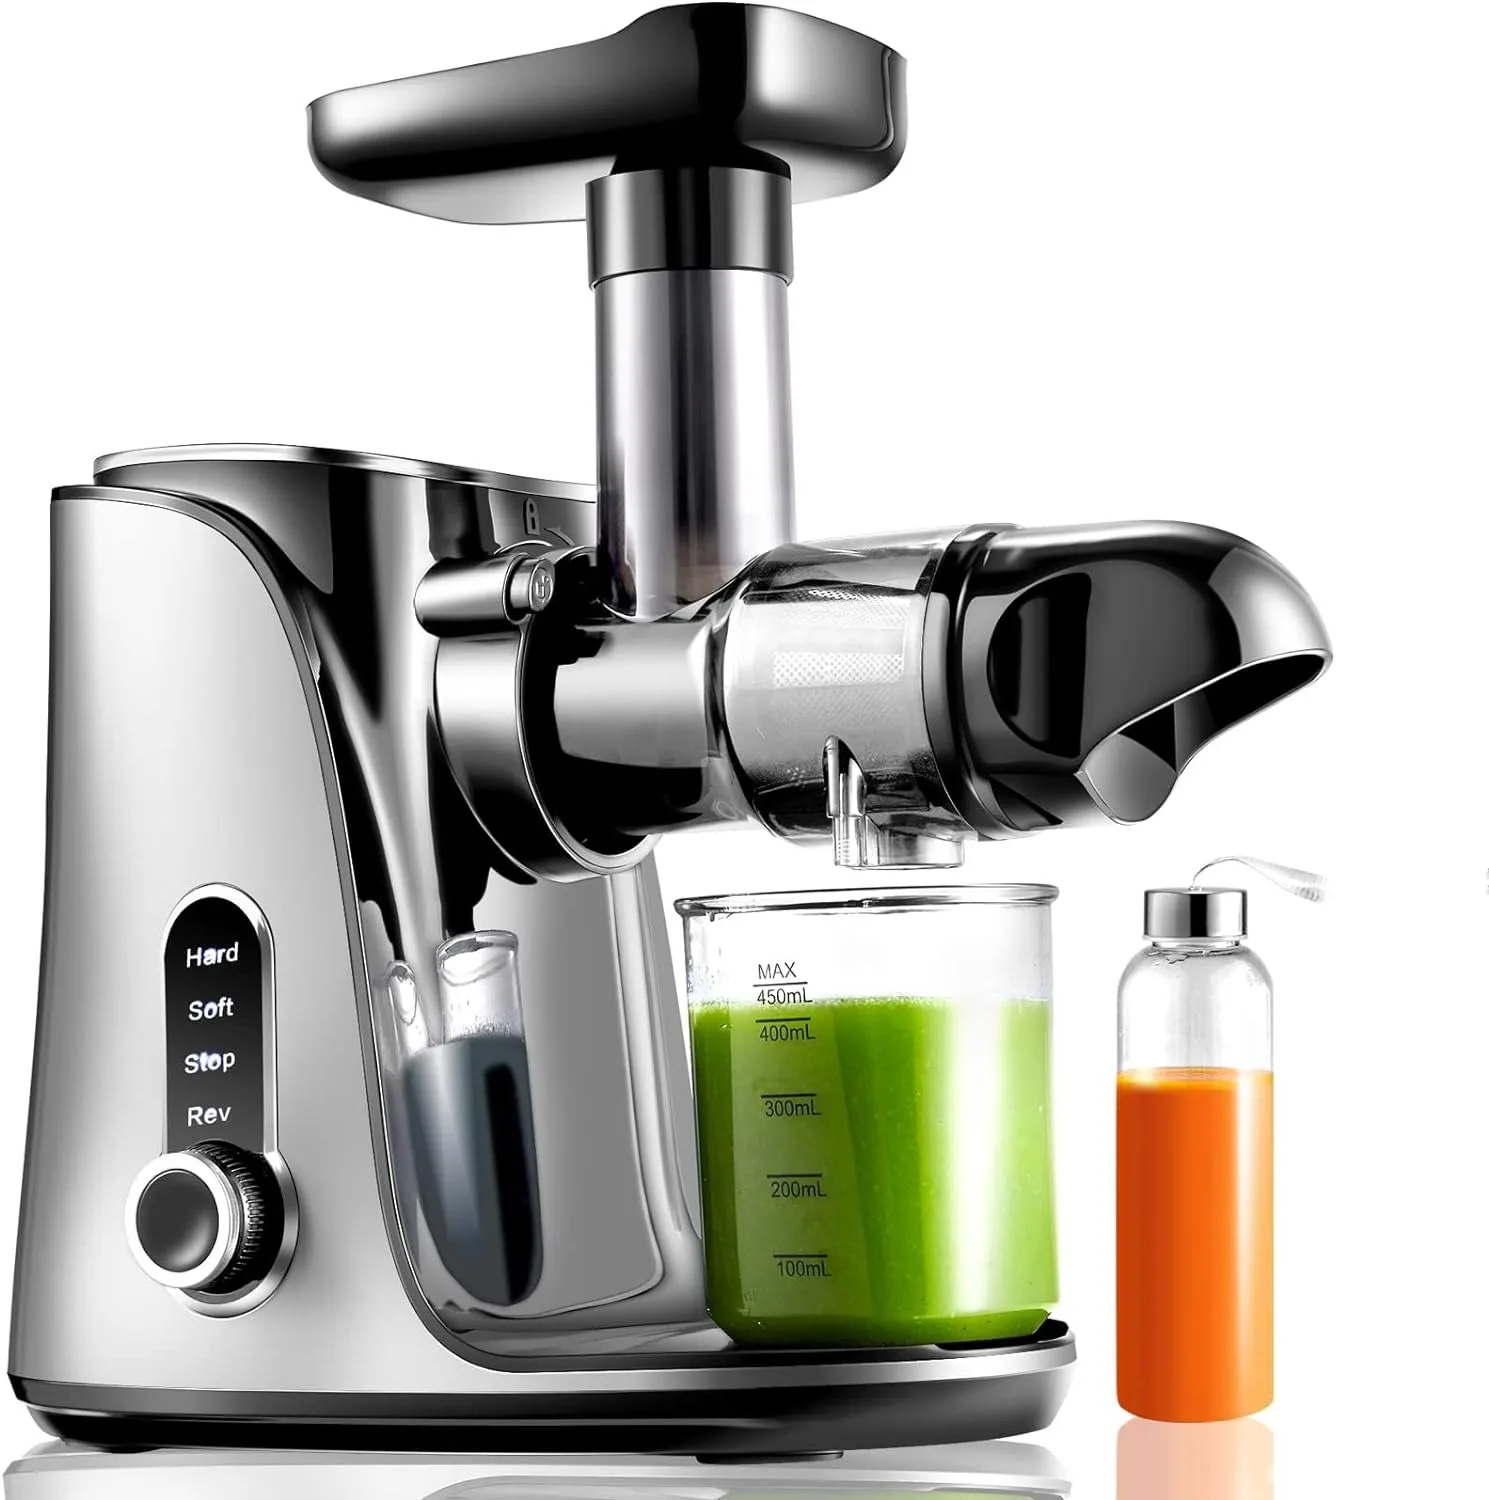 

Juicer Machines, Slow Masticating Juicer, Juicer with Two Speed Modes, Travel bottles(500ML),LED display, Easy to Clean Brush